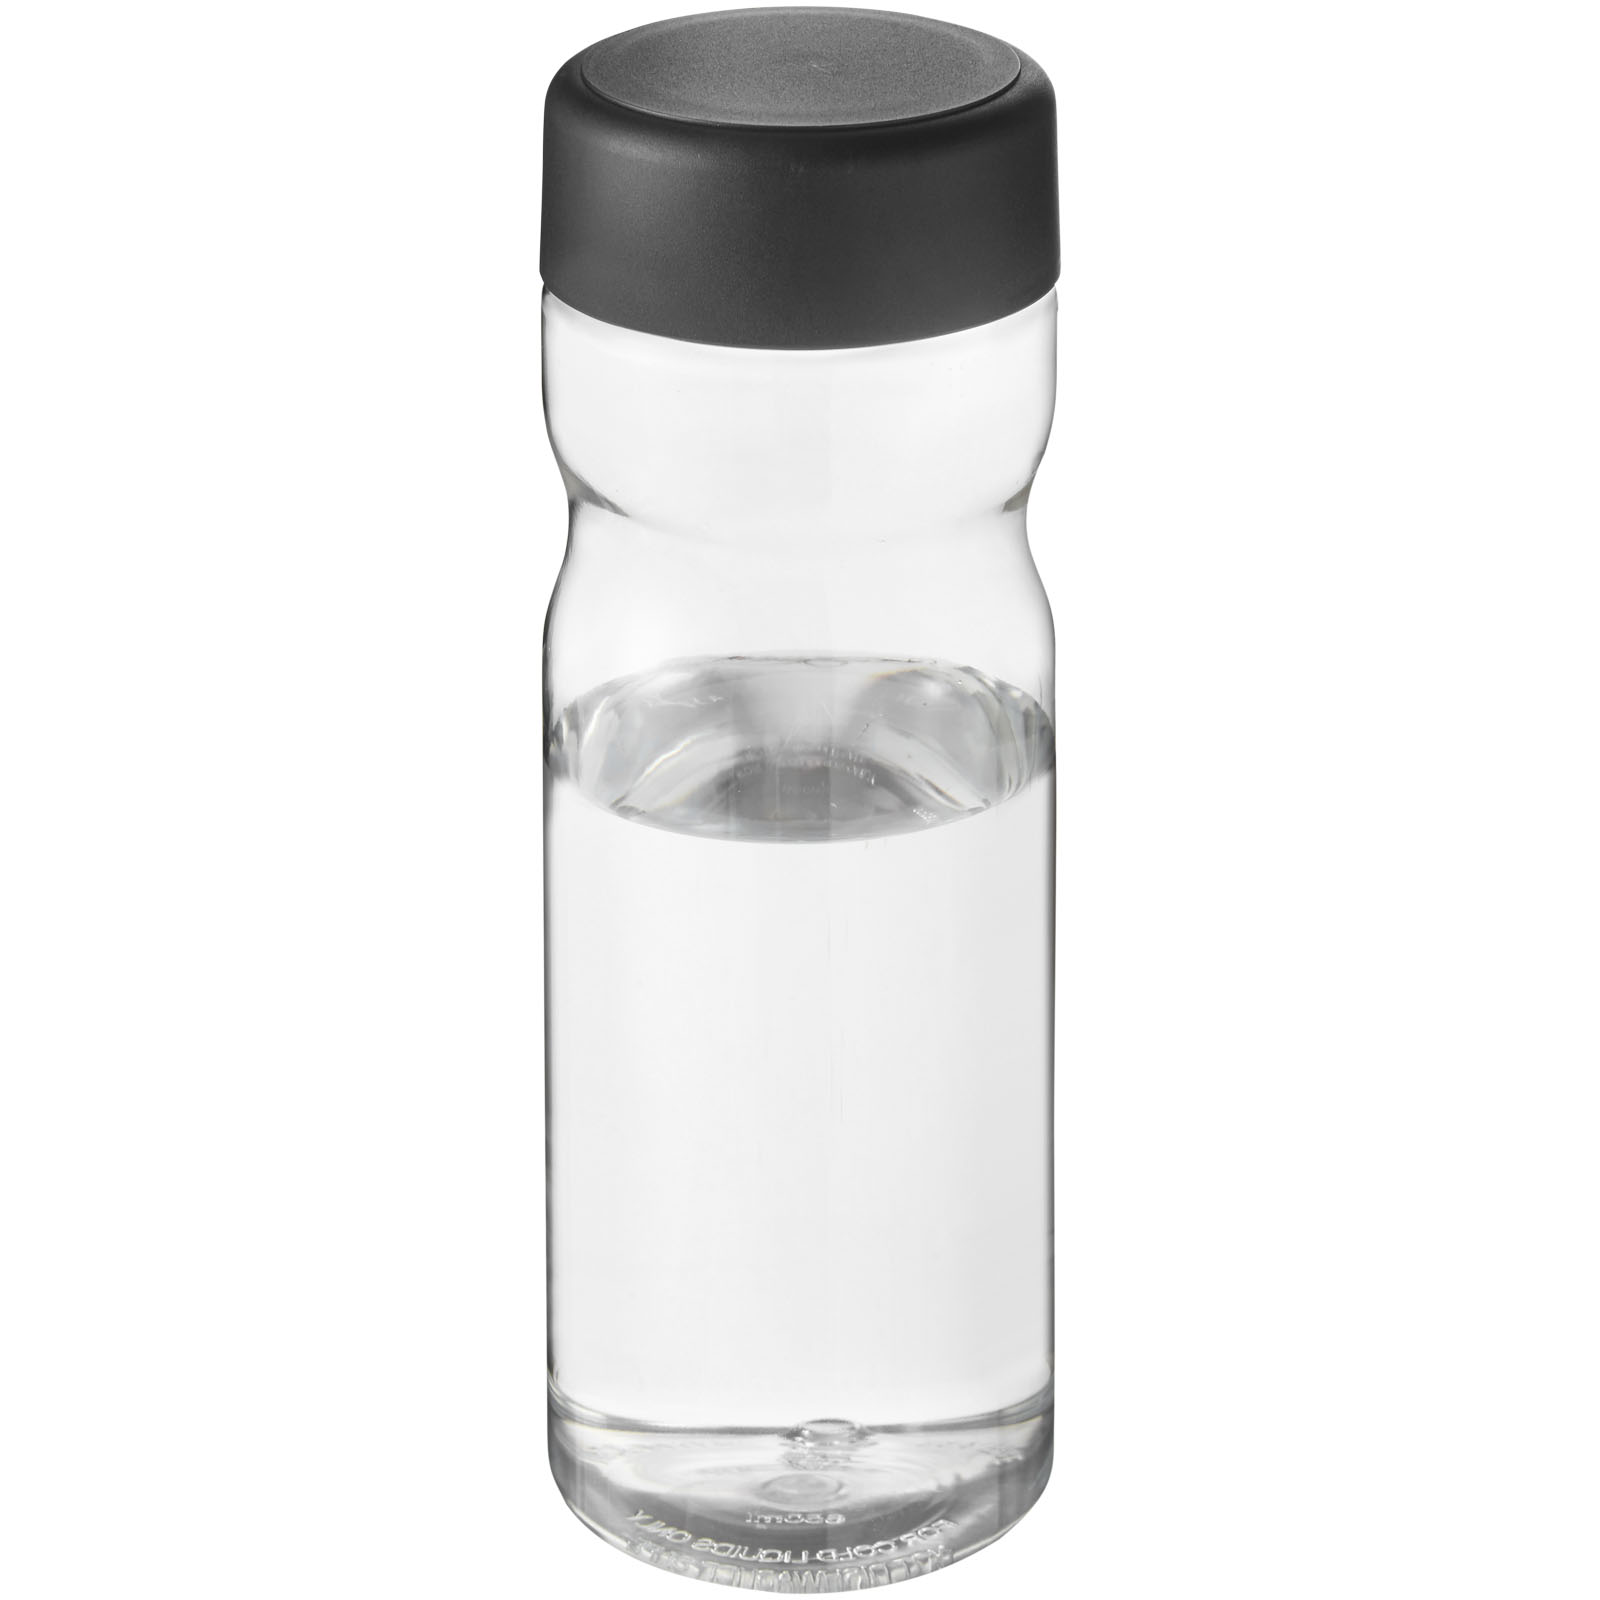 Ergonomic Recyclable Water Bottle - Towton